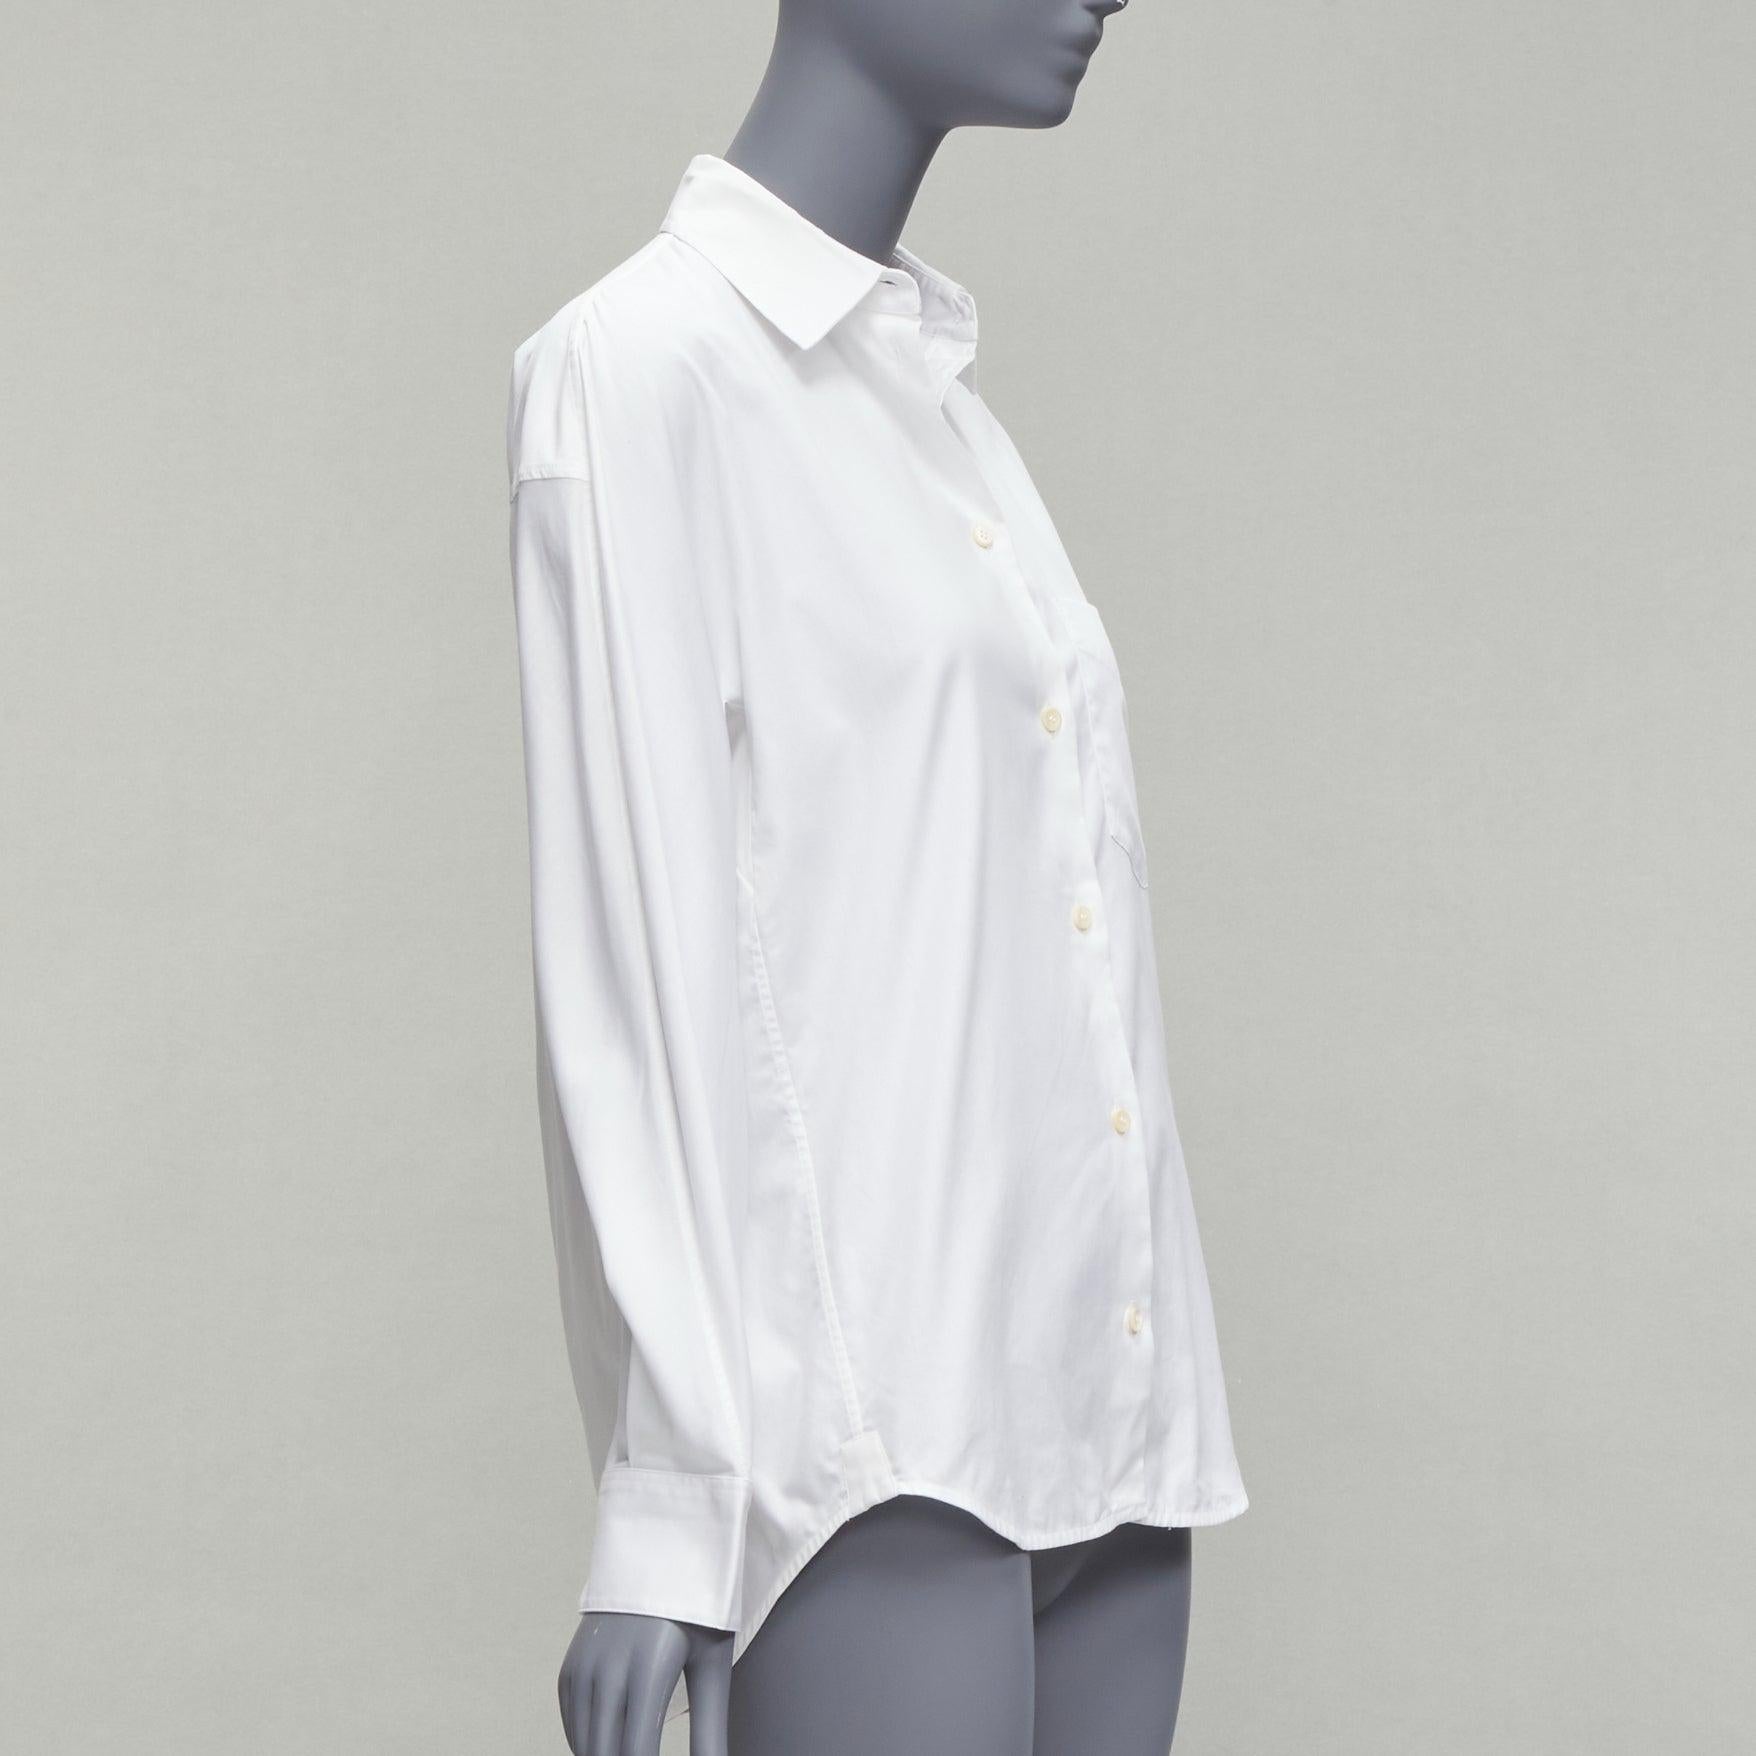 BALENCIAGA 2016 white curved hem topstitch pocket shirt FR36 S
Reference: CAWG/A00281
Brand: Balenciaga
Collection: 2016
Material: Cotton
Color: White
Pattern: Solid
Closure: Button
Made in: Italy

CONDITION:
Condition: Very good, this item was